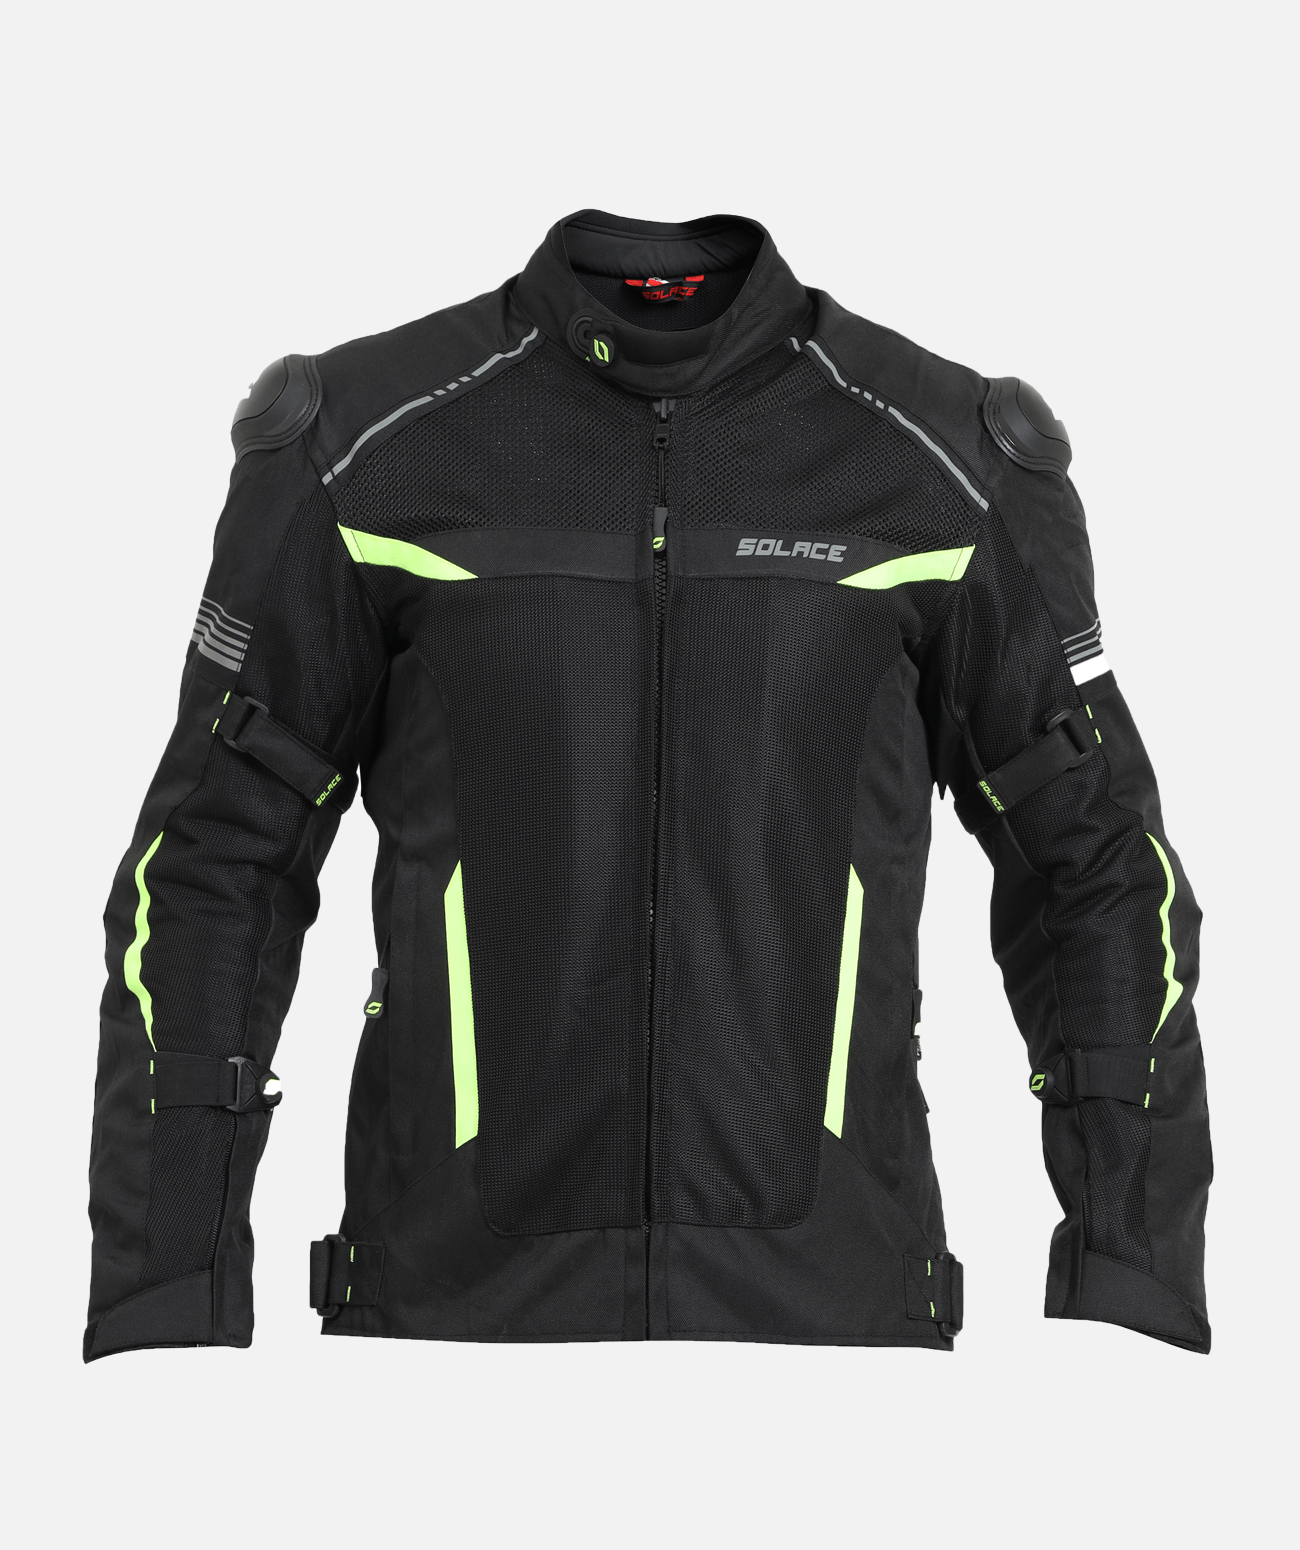 Women's Mesh Lightweight 2 Riding Jacket with Removable Liner, Black |  Indian Motorcycle